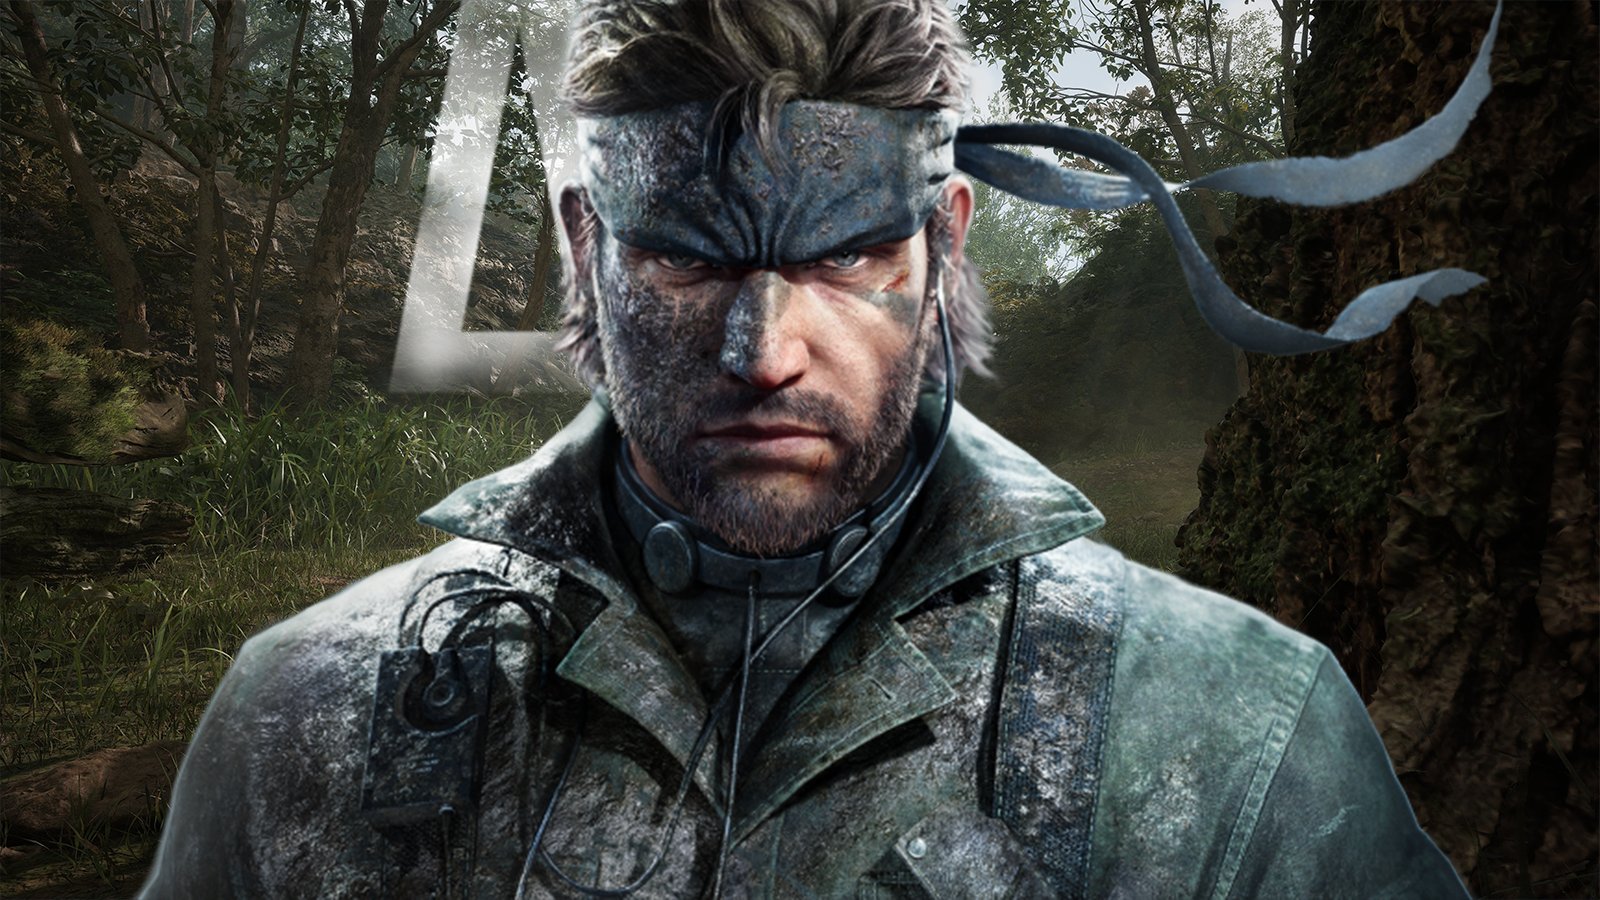 Metal Gear Solid Delta: Snake Eater – 11 Details You May have